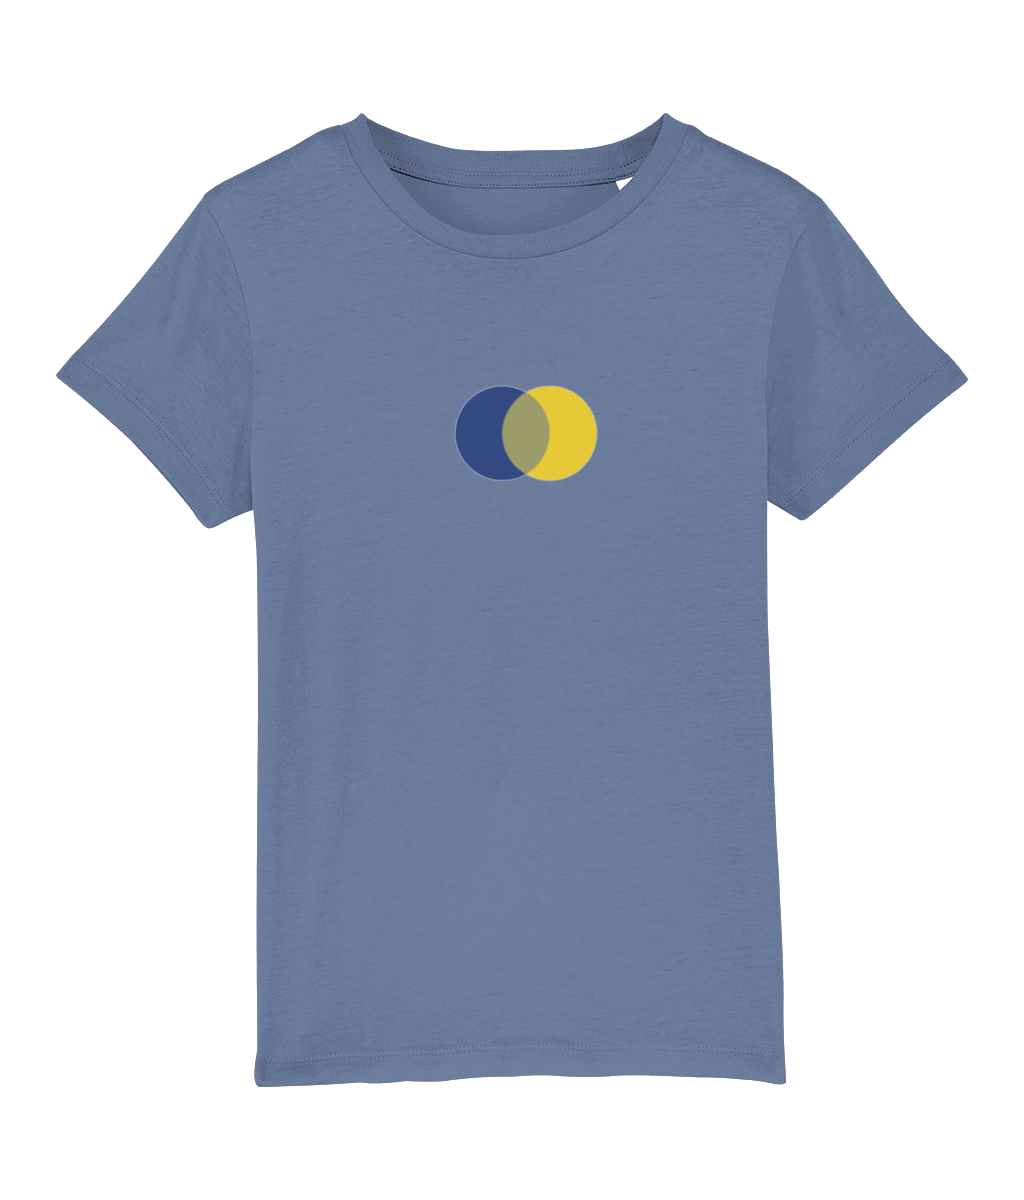 Blue Yellow Makes Green Organic Cotton T Shirt - Buy any 3 get 10% off